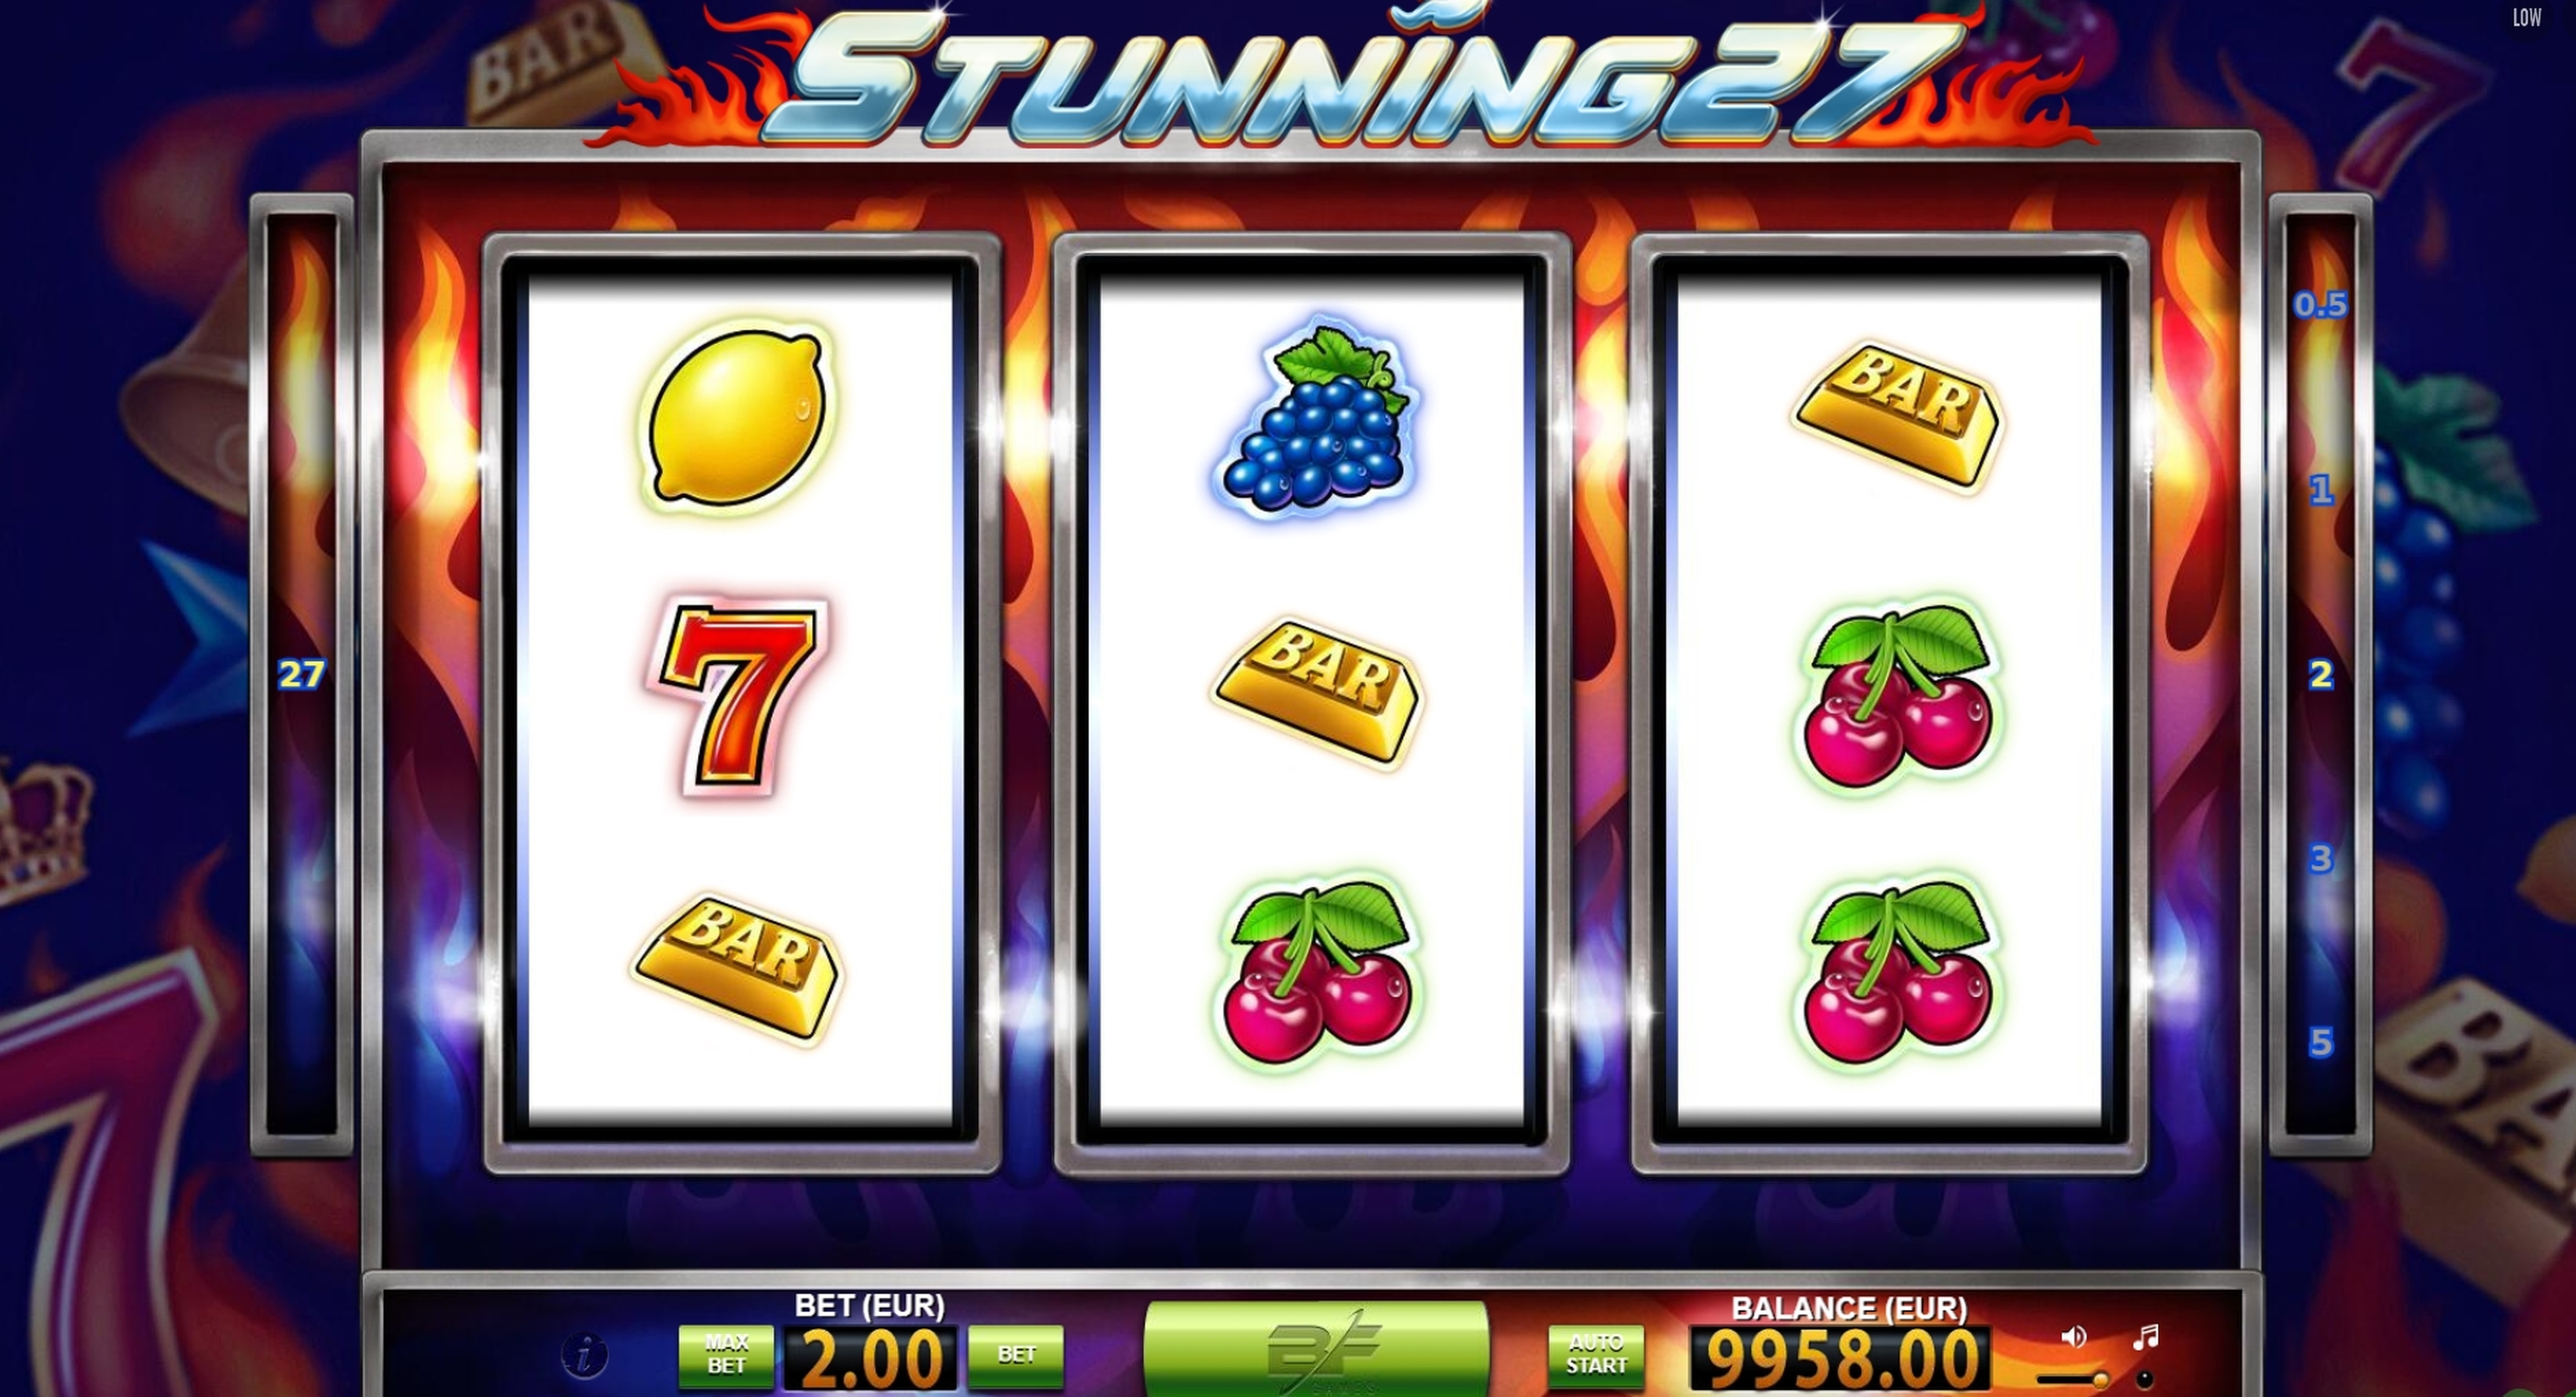 Win Money in Stunning 27 Free Slot Game by BF Games